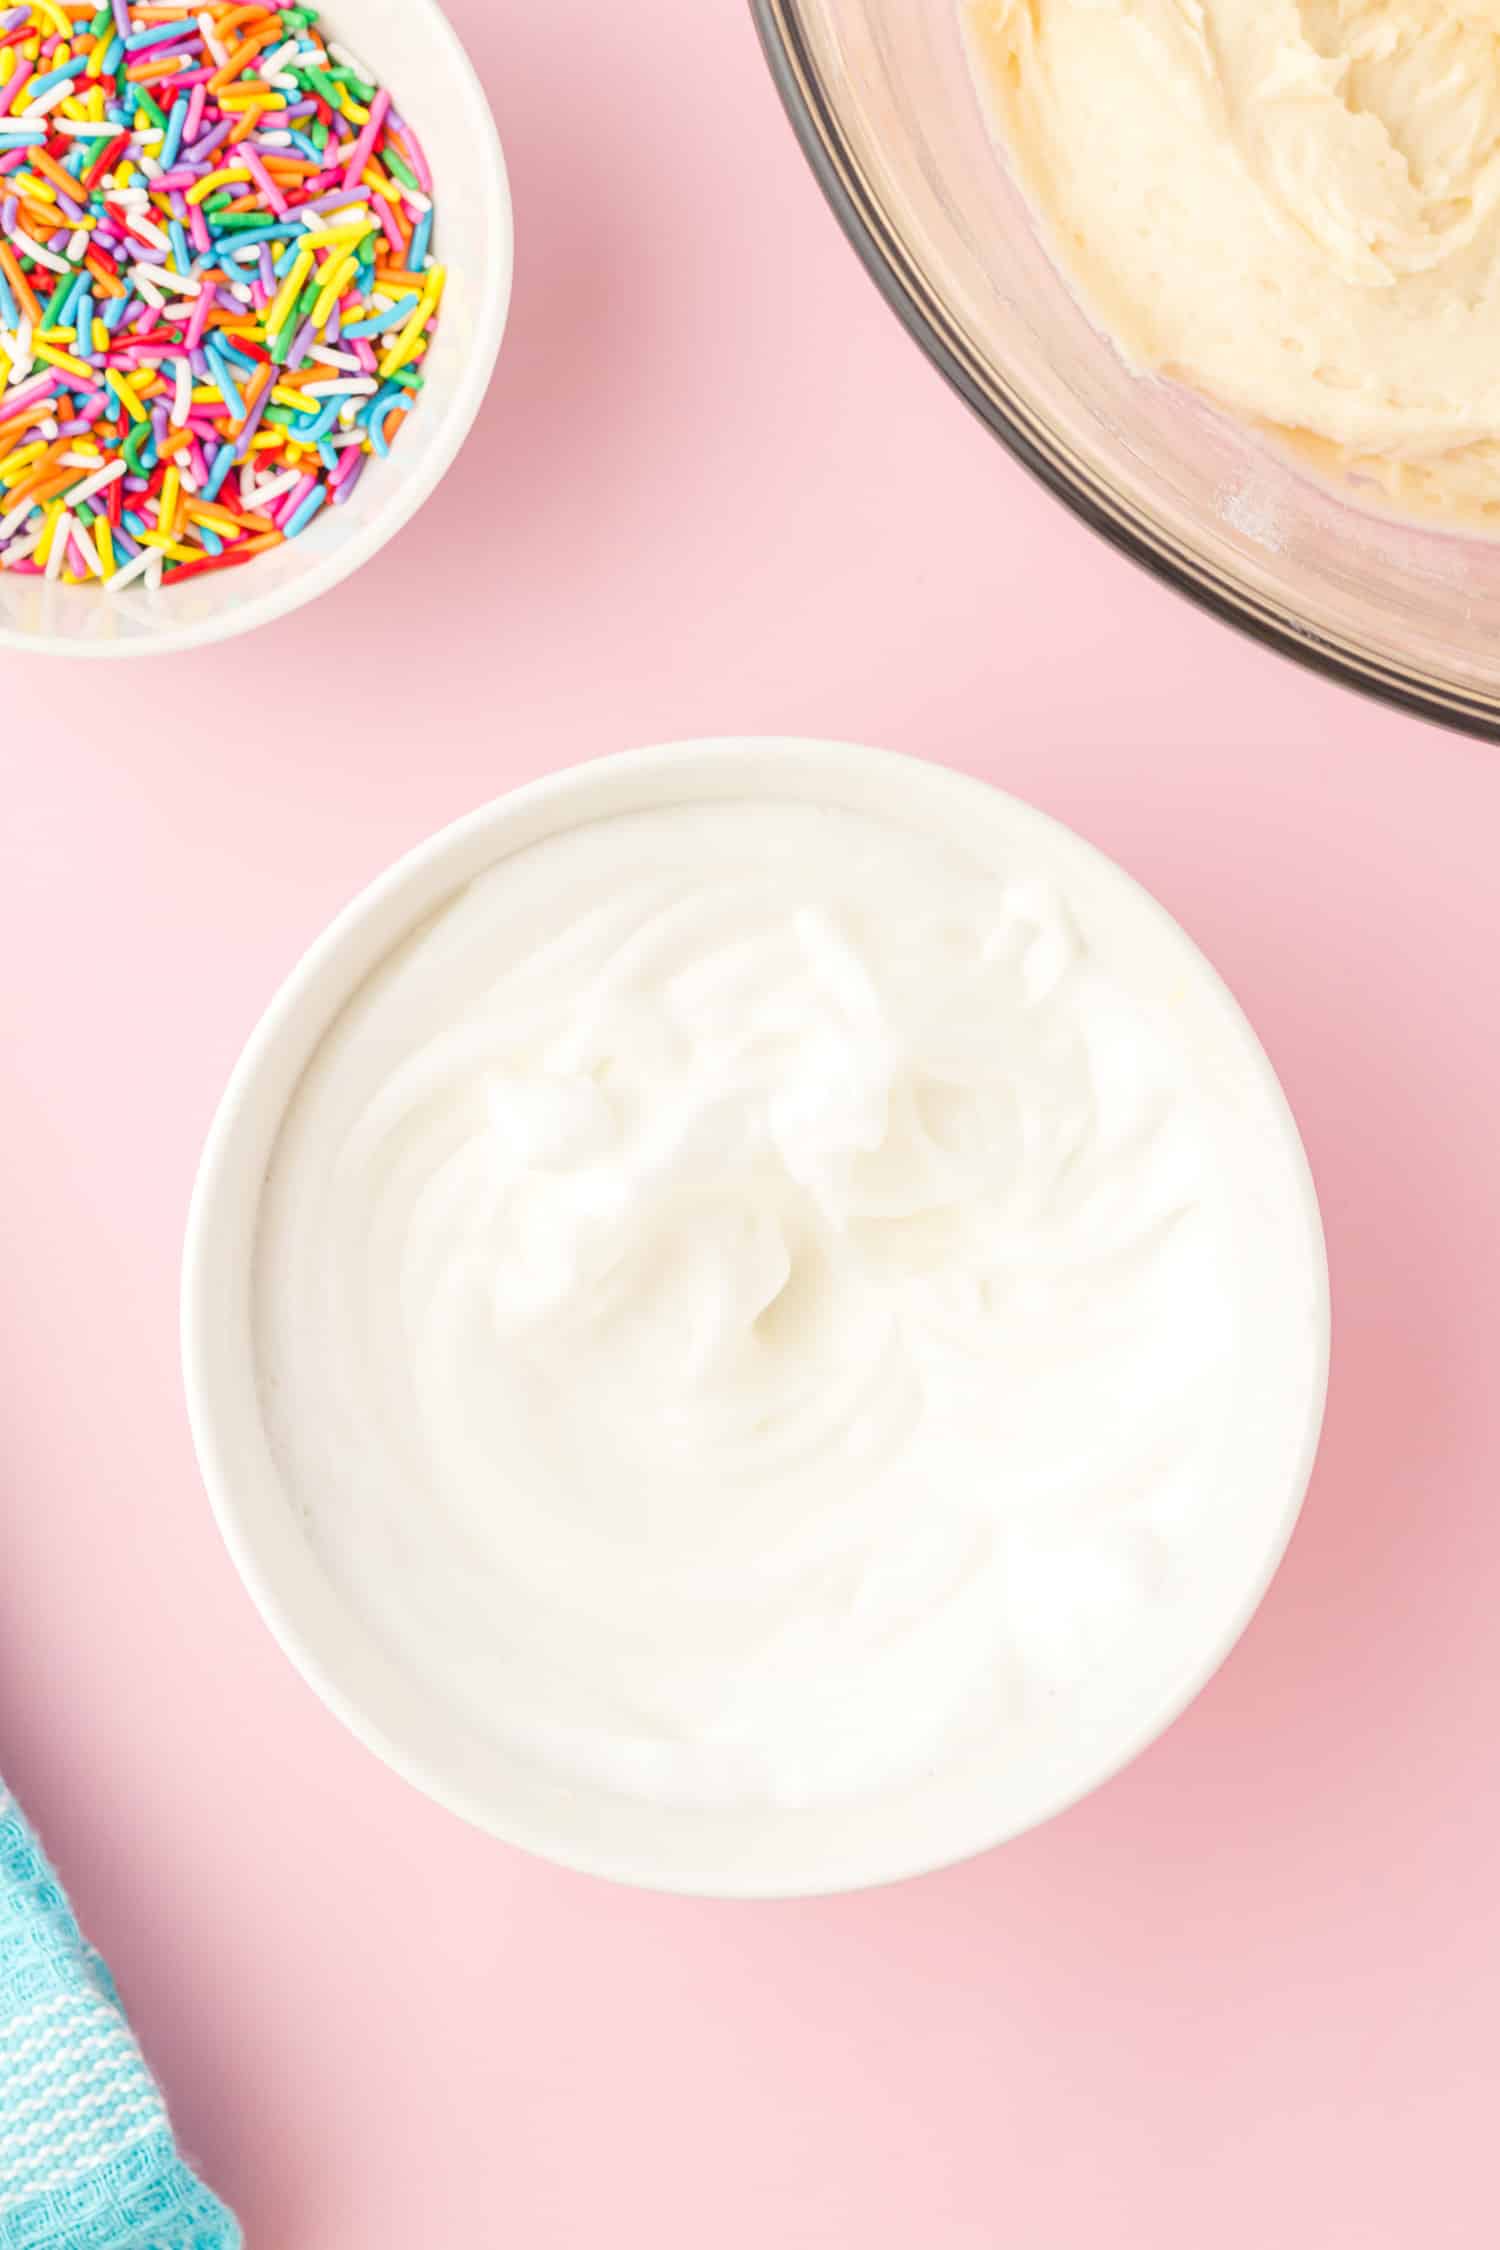 Whipped egg whites in bowl on pink background